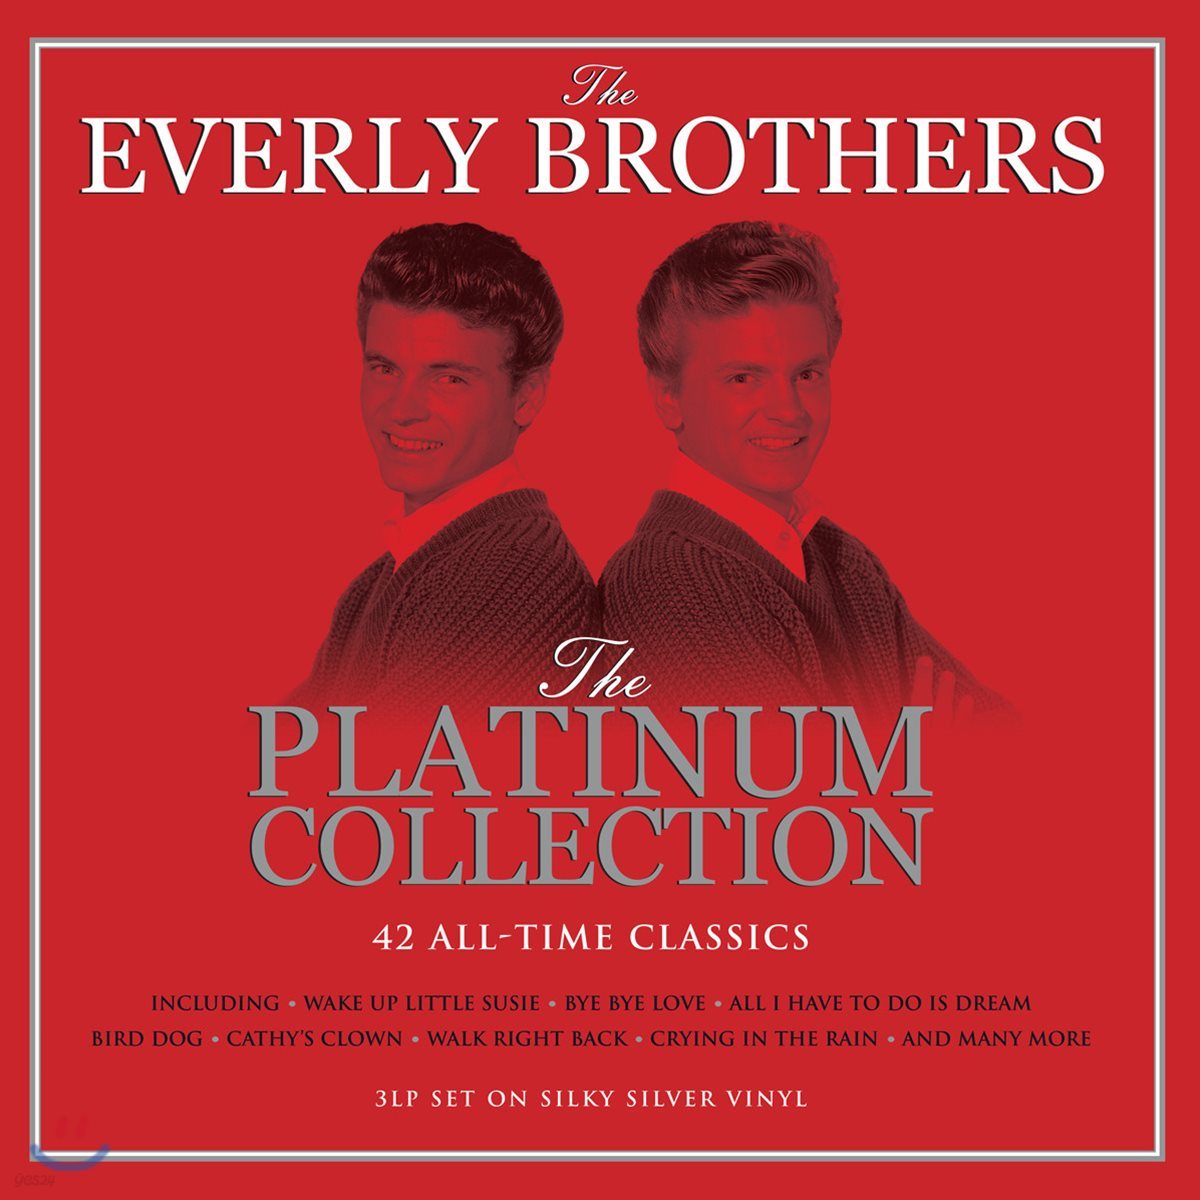 The Everly Brothers (에벌리 브라더스) - The Platinum Collection [3LP]